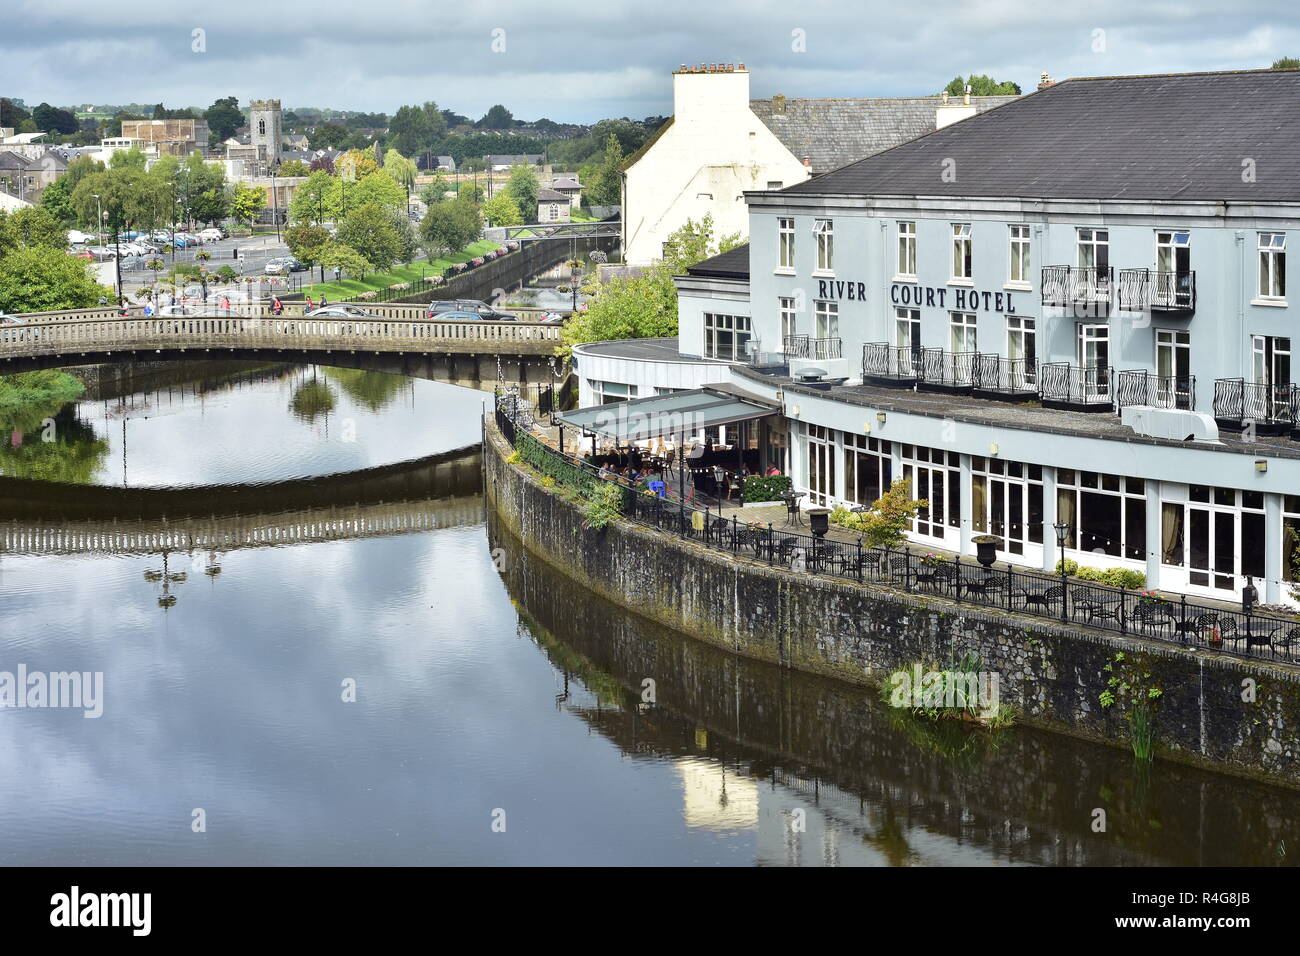 River Court Hotel on River Nore in Kilkenny on calm day when river surface mirrors surroundings. Stock Photo